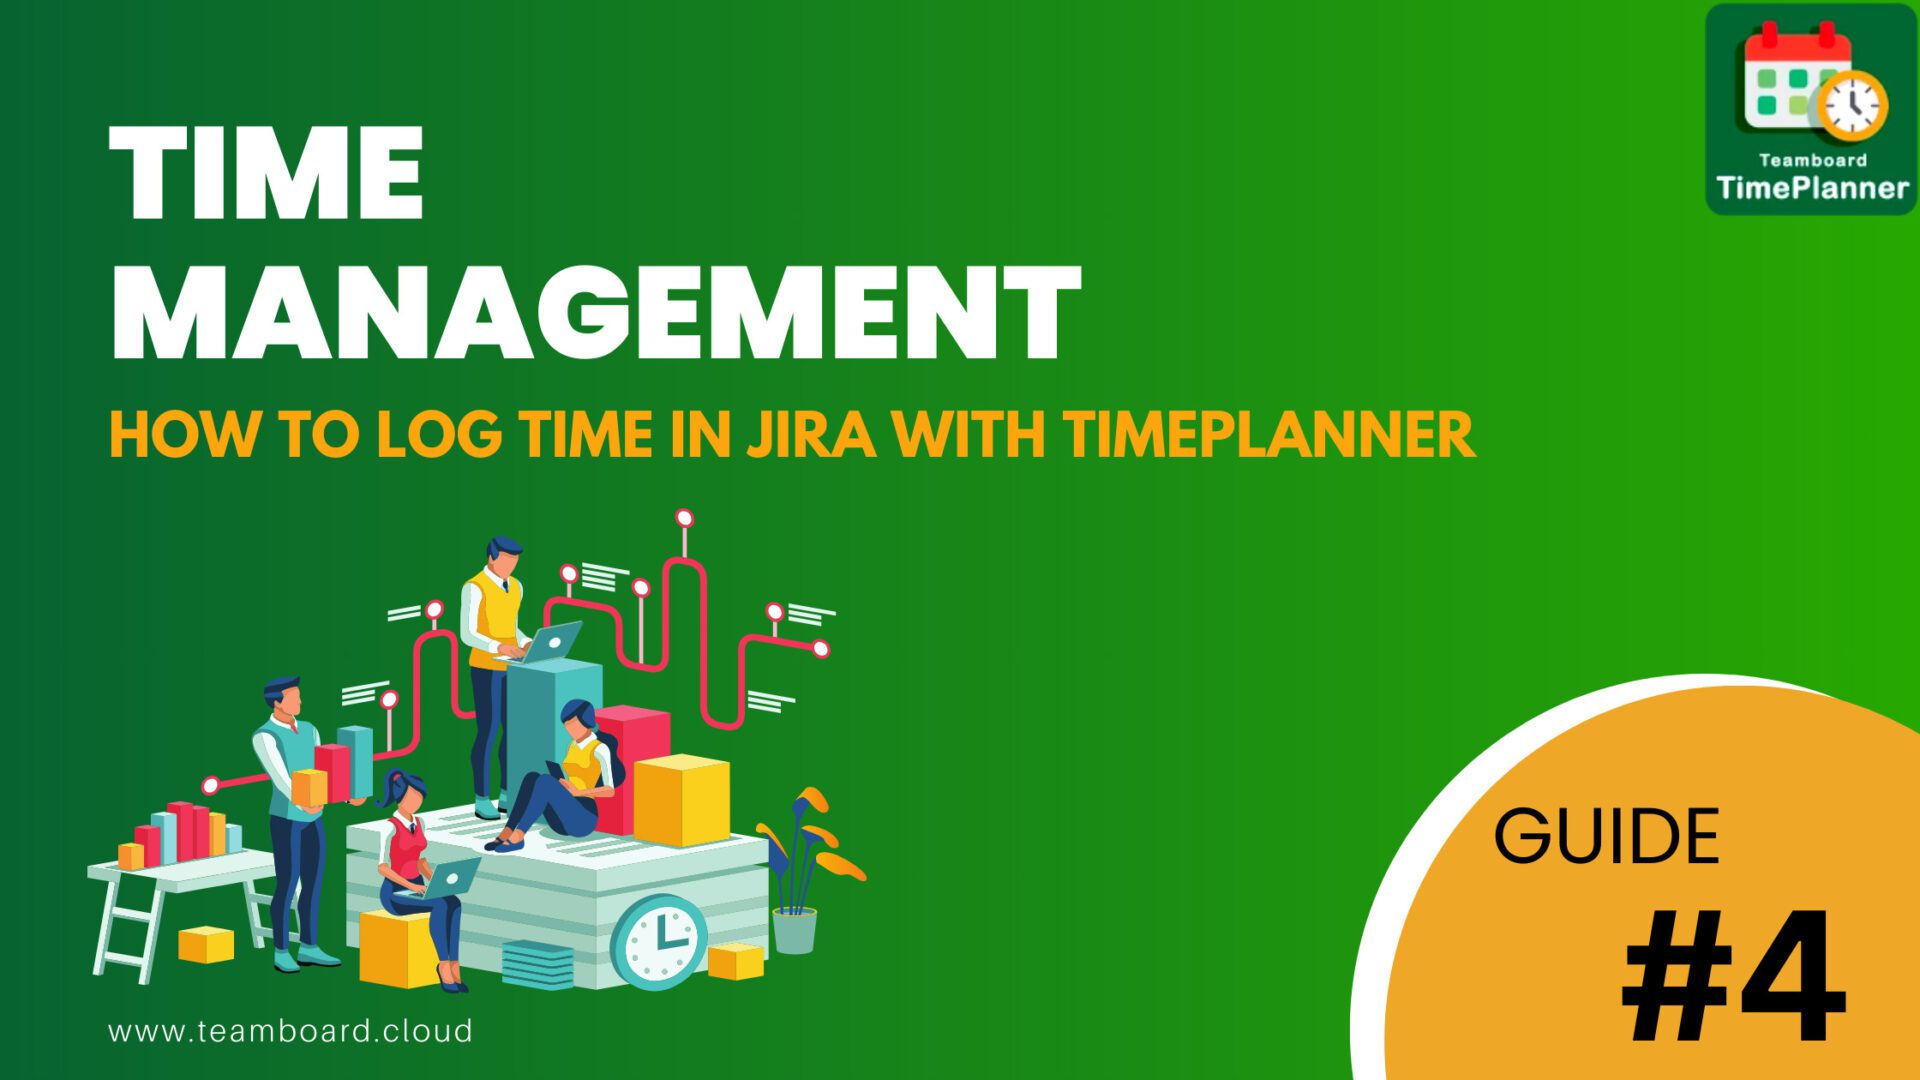 how to log time in jira with Teamboard TimePlanner